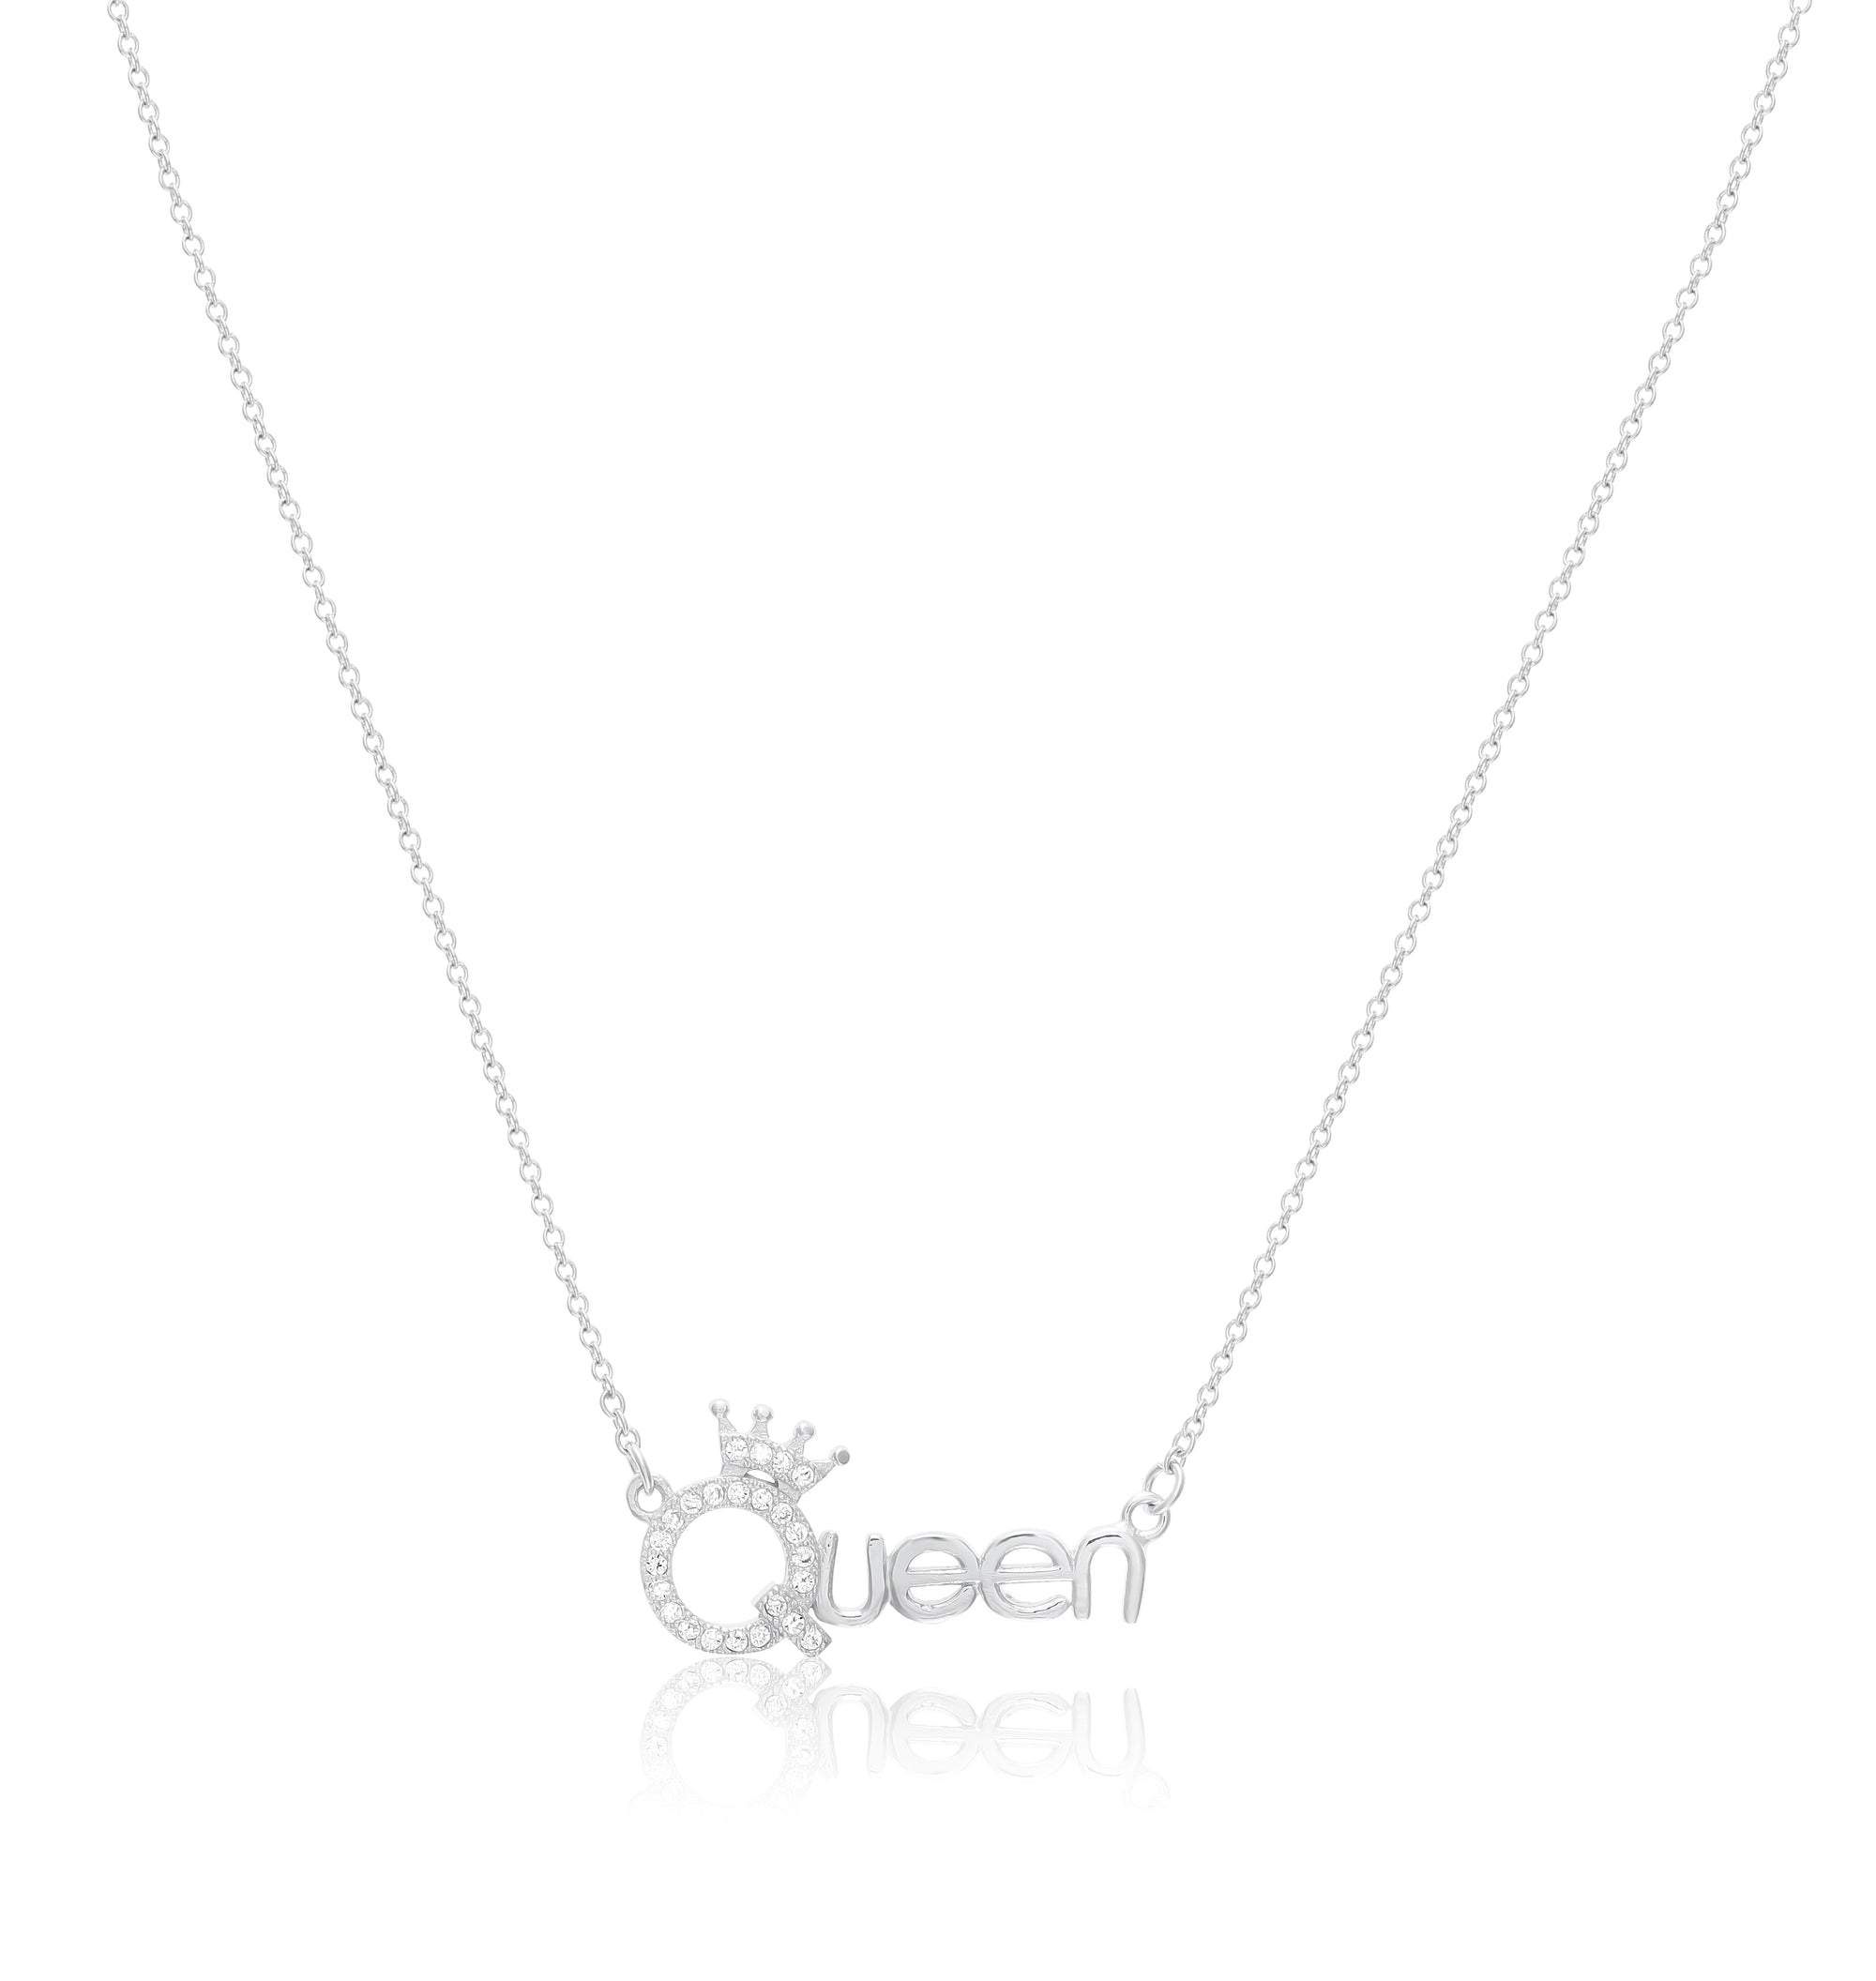 QUEEN Word Necklace in Sterling Silver